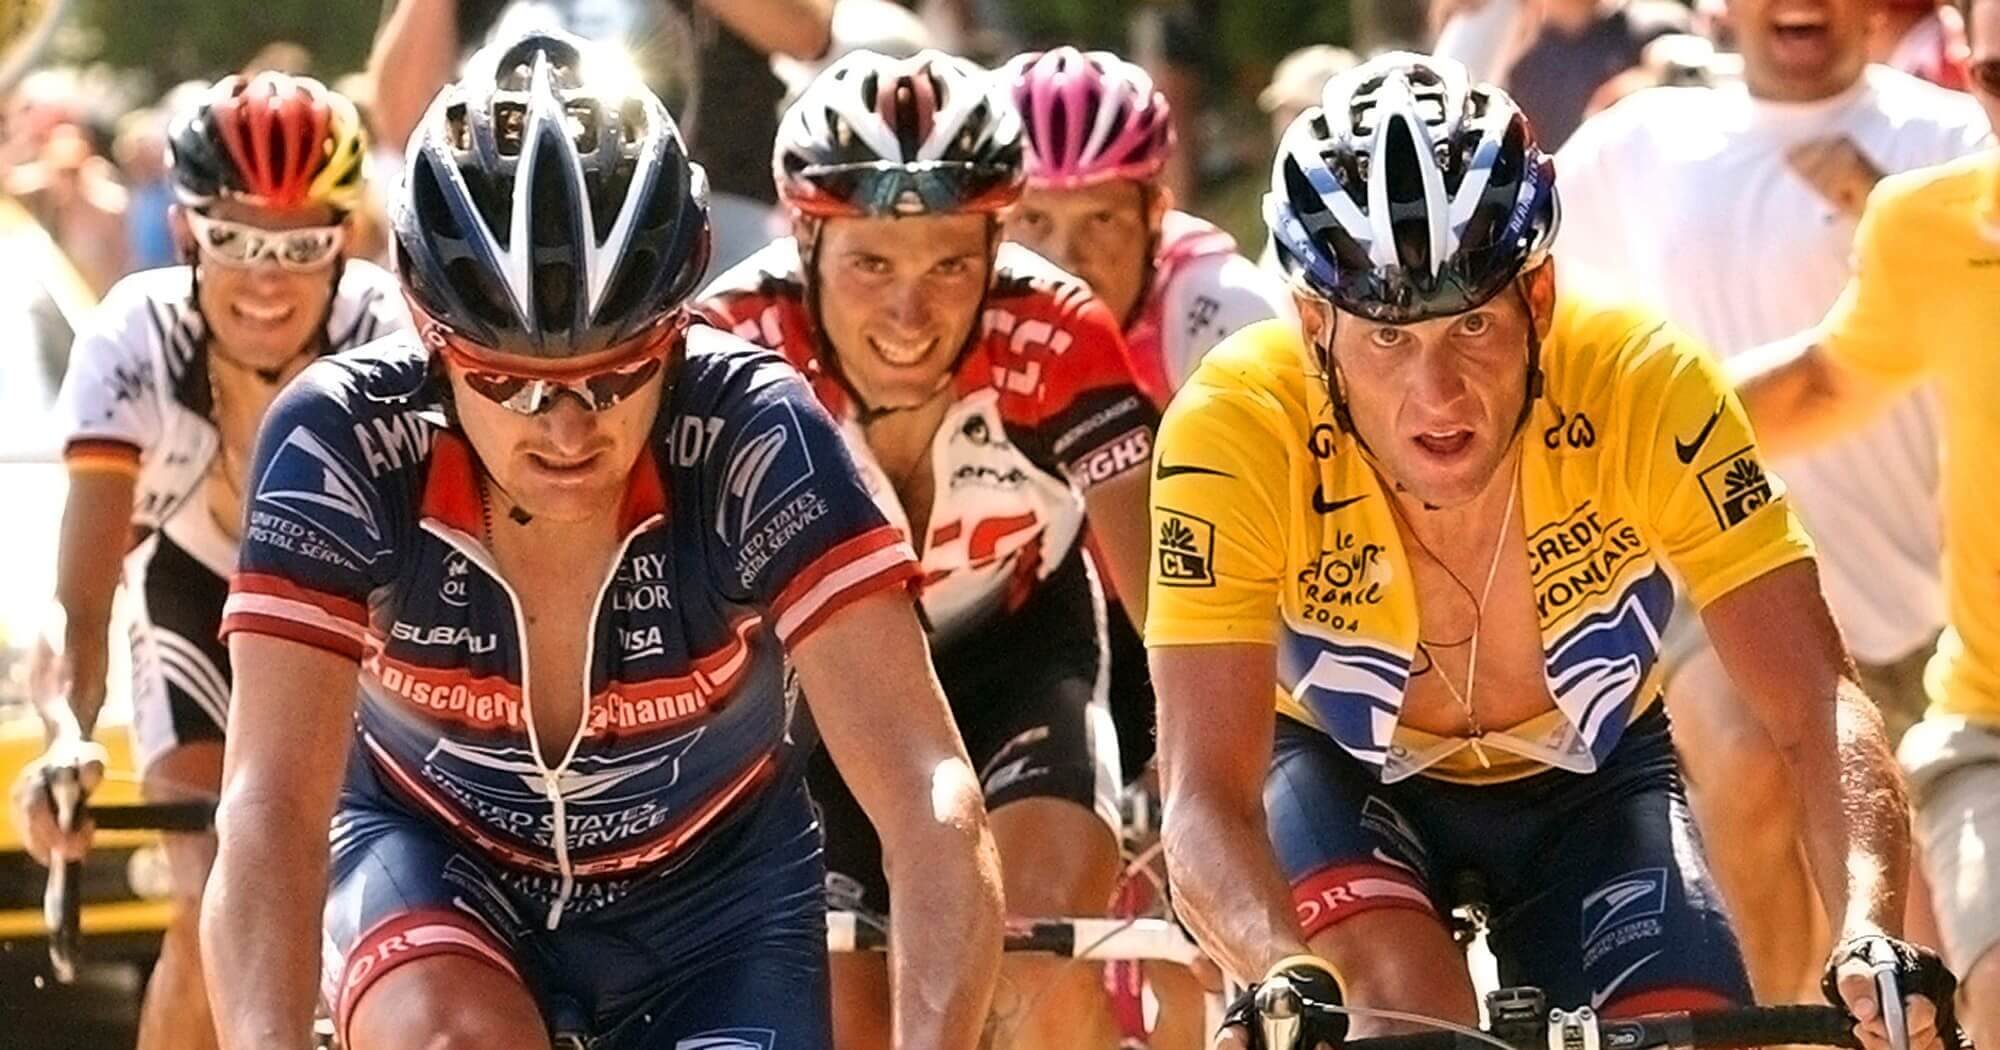 Lance Armstrong, right, follows teammate Floyd Landis, left, in the ascent of the La Croix Fry pass during the 17th stage of the Tour de France in 2004.